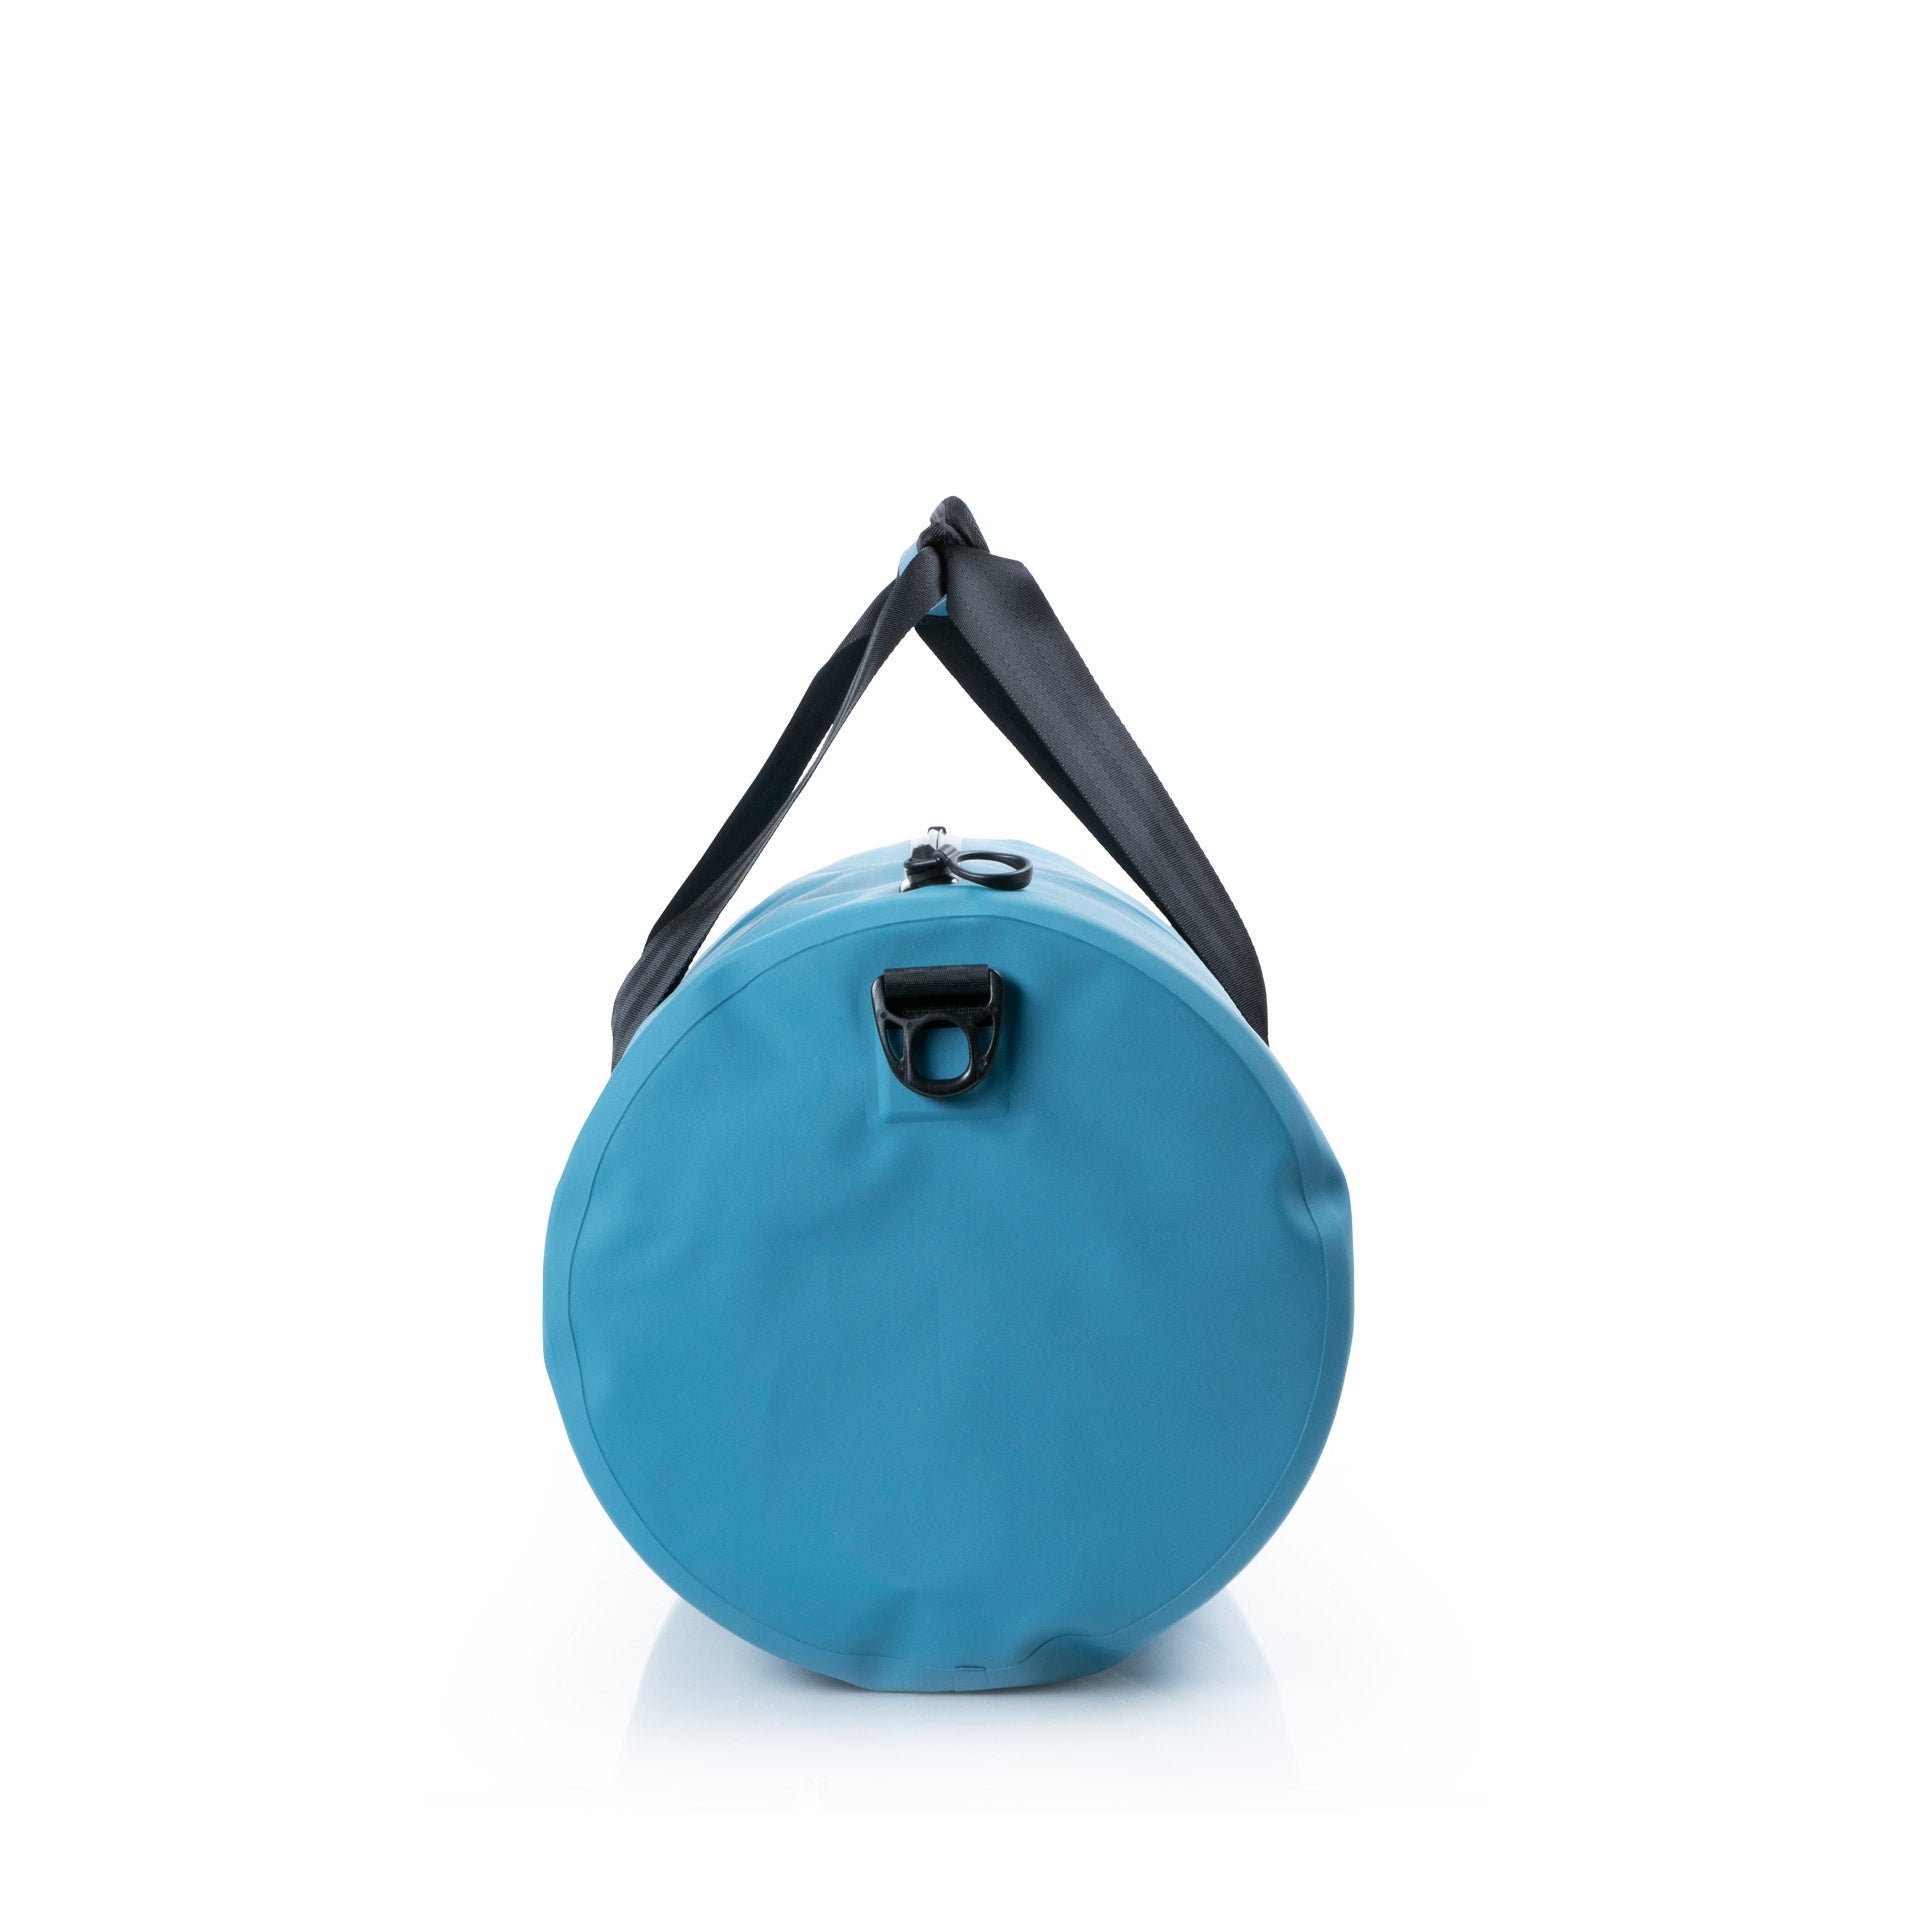 Submersible Waterproof Bag with shoulder strap - Blue